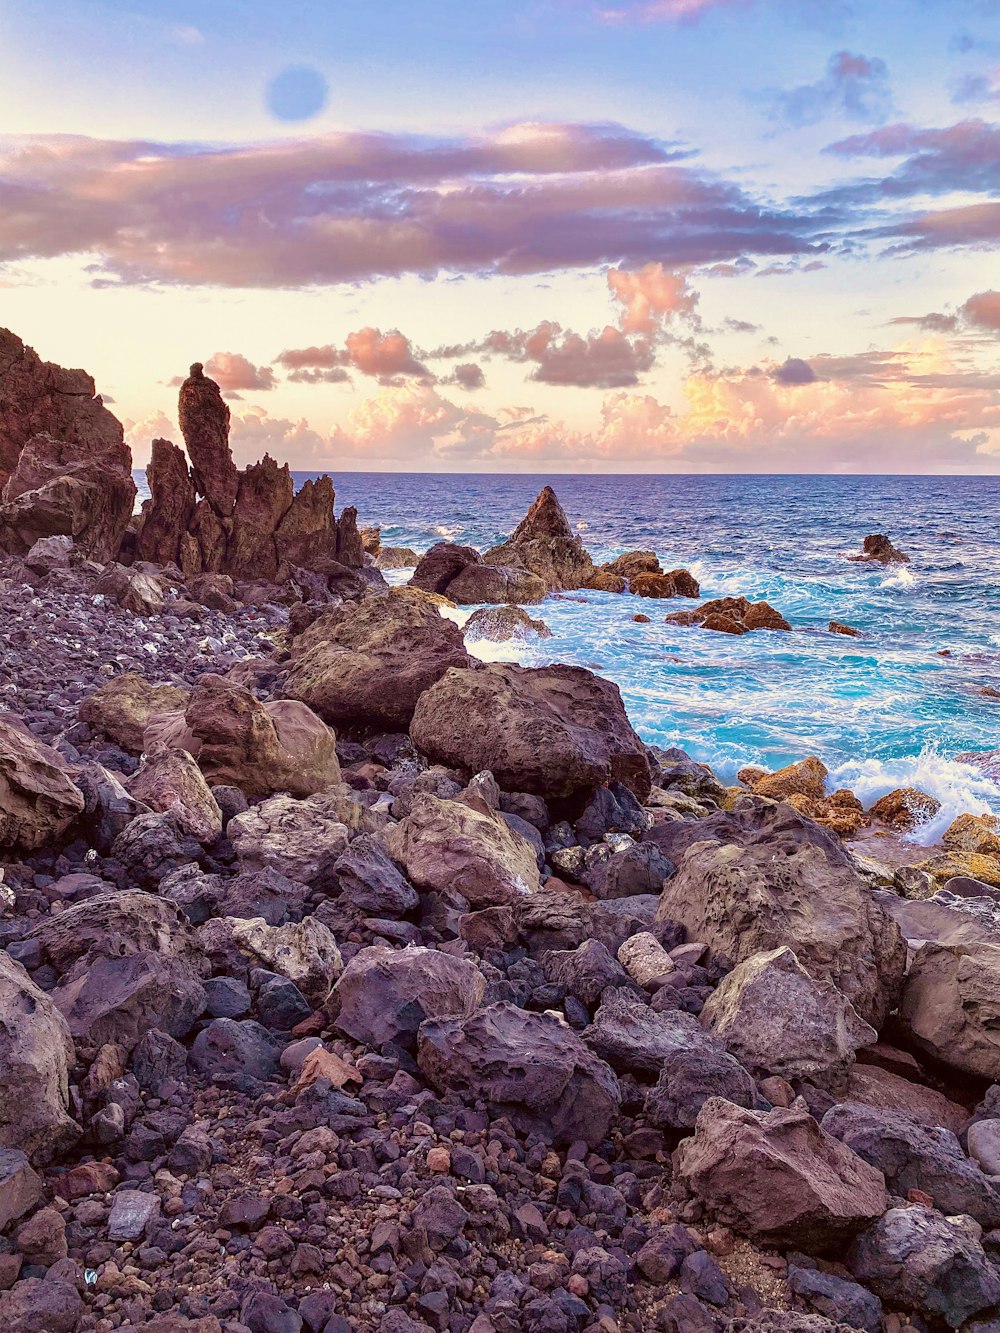 rocky shore with ocean waves crashing on shore during sunset